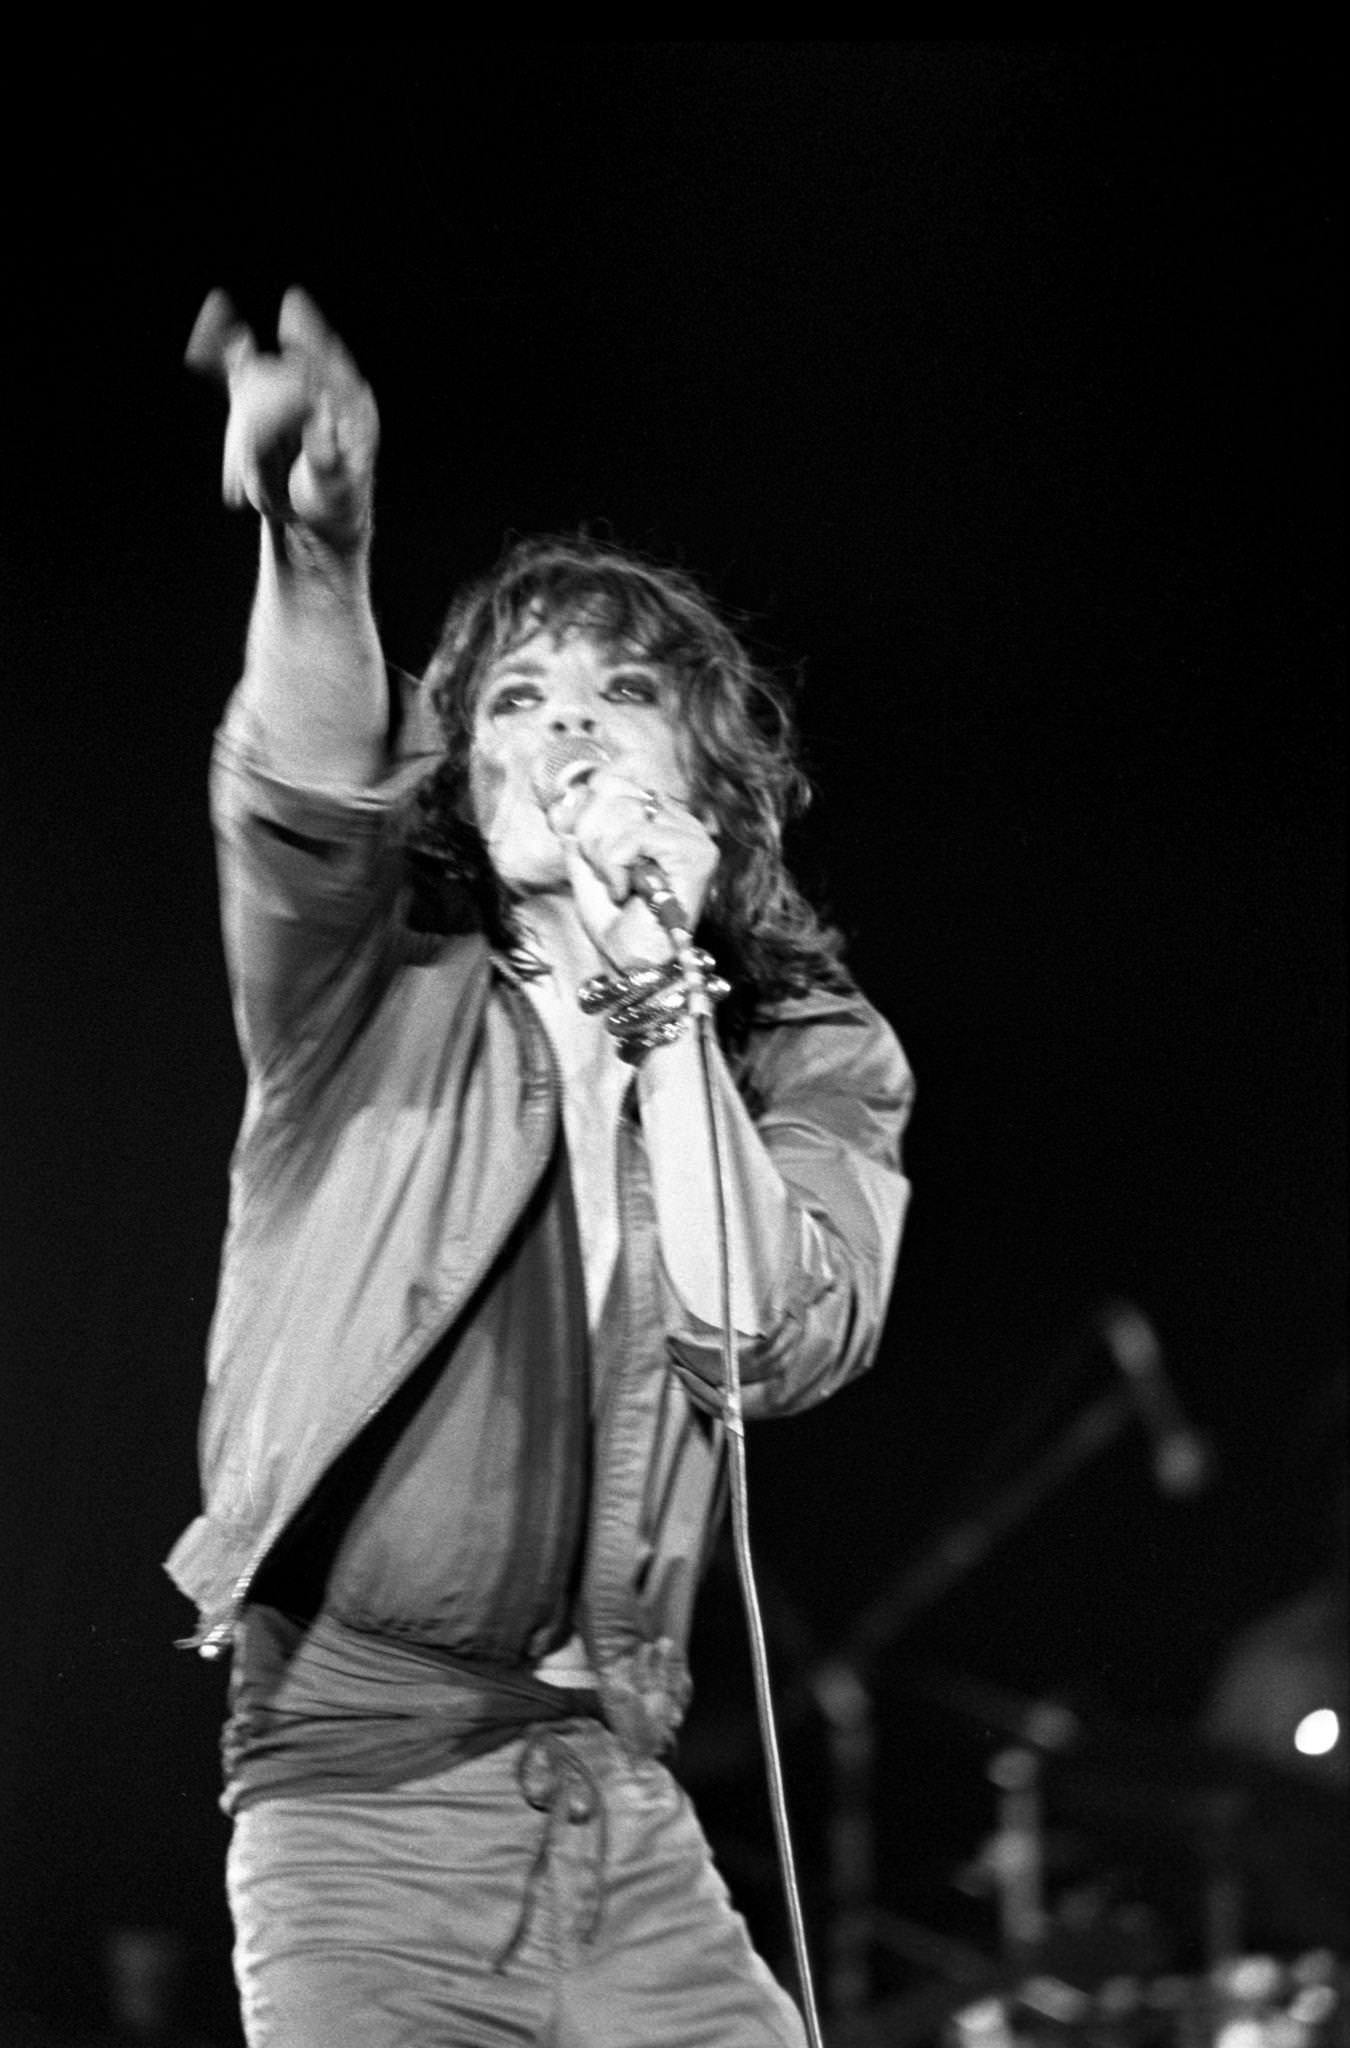 Mick Jagger performs at Madison Square Garden during the band's "Tour of America '75" on June 25, 1975, in New York, New York.